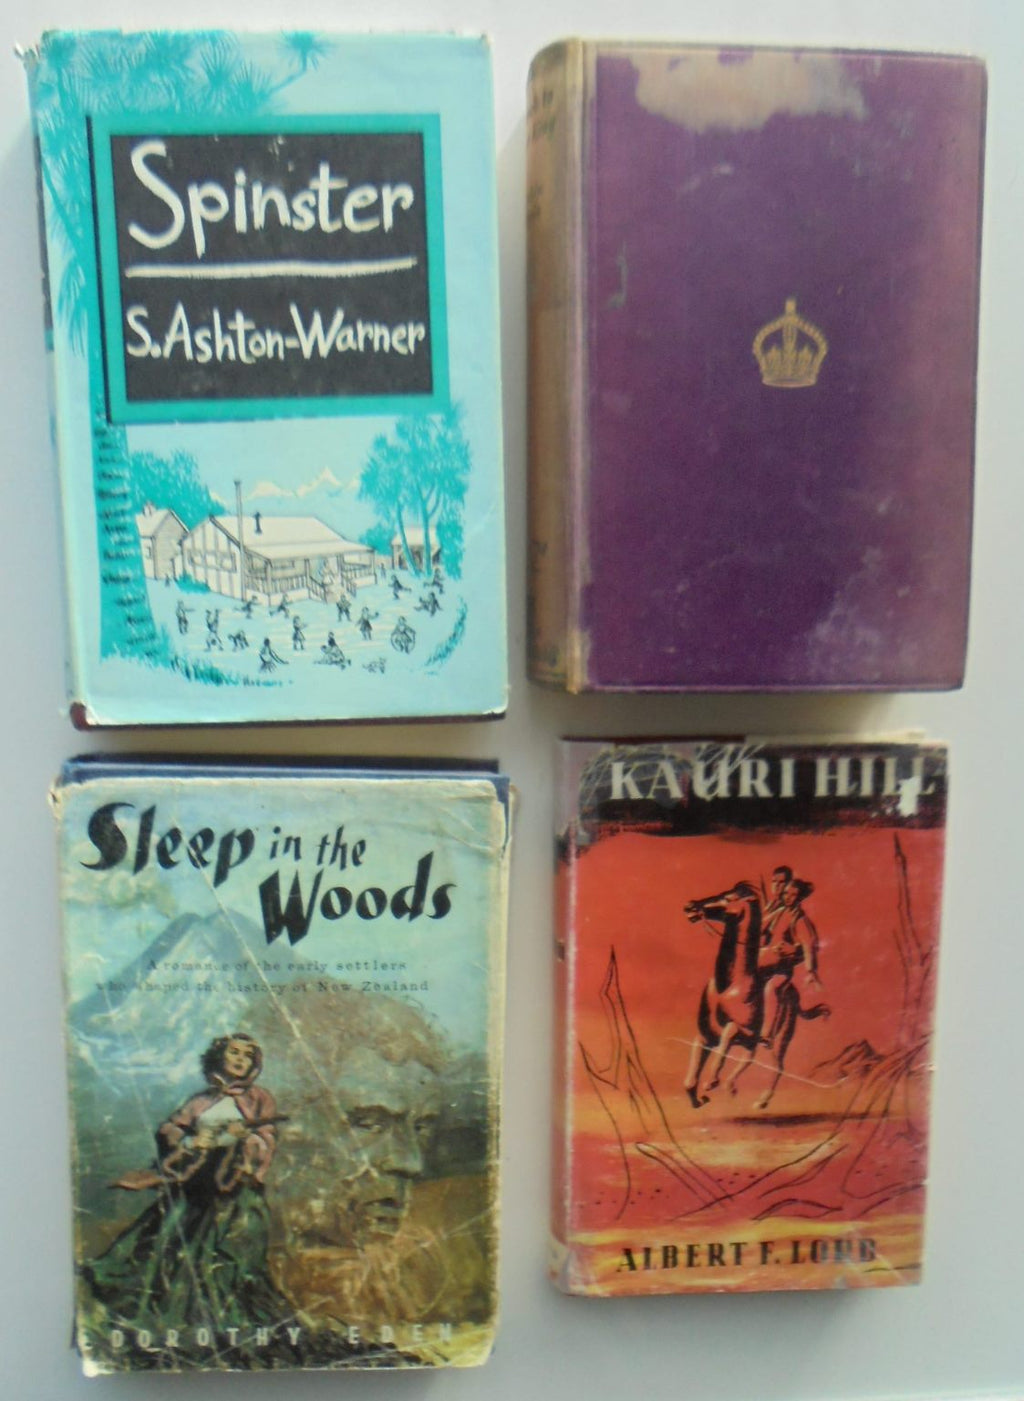 Four New Zealand Novels. Spinster by S. Ashton, Sleep In The Woods by Dorothy Eden. Kaurin Hill. By Albert F. Lord. Check to your King. By Robyn Hyde